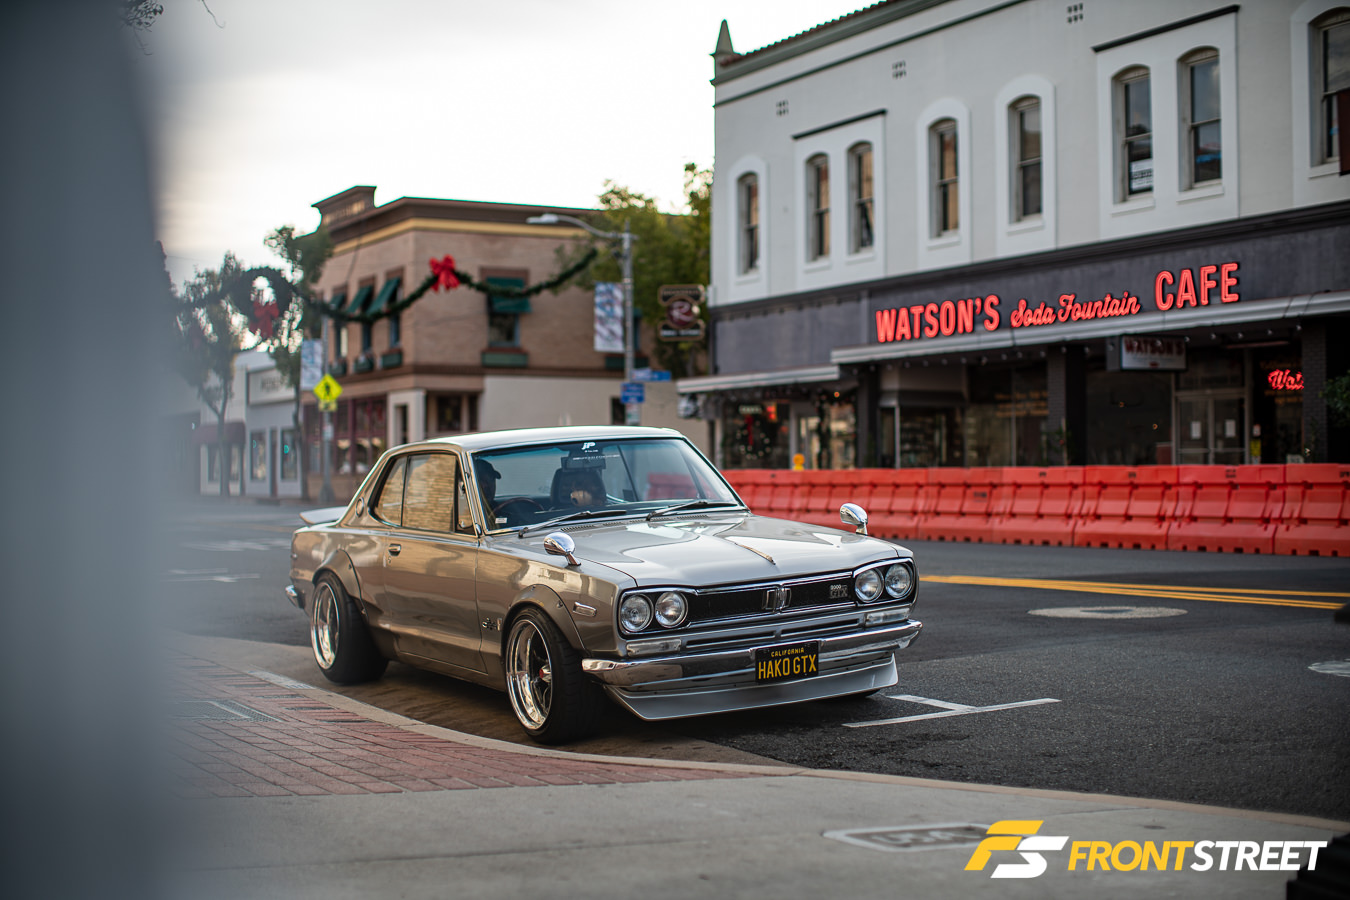 Messing With Perfection: Rick Ishitani's 1971 Skyline 2000GT-X